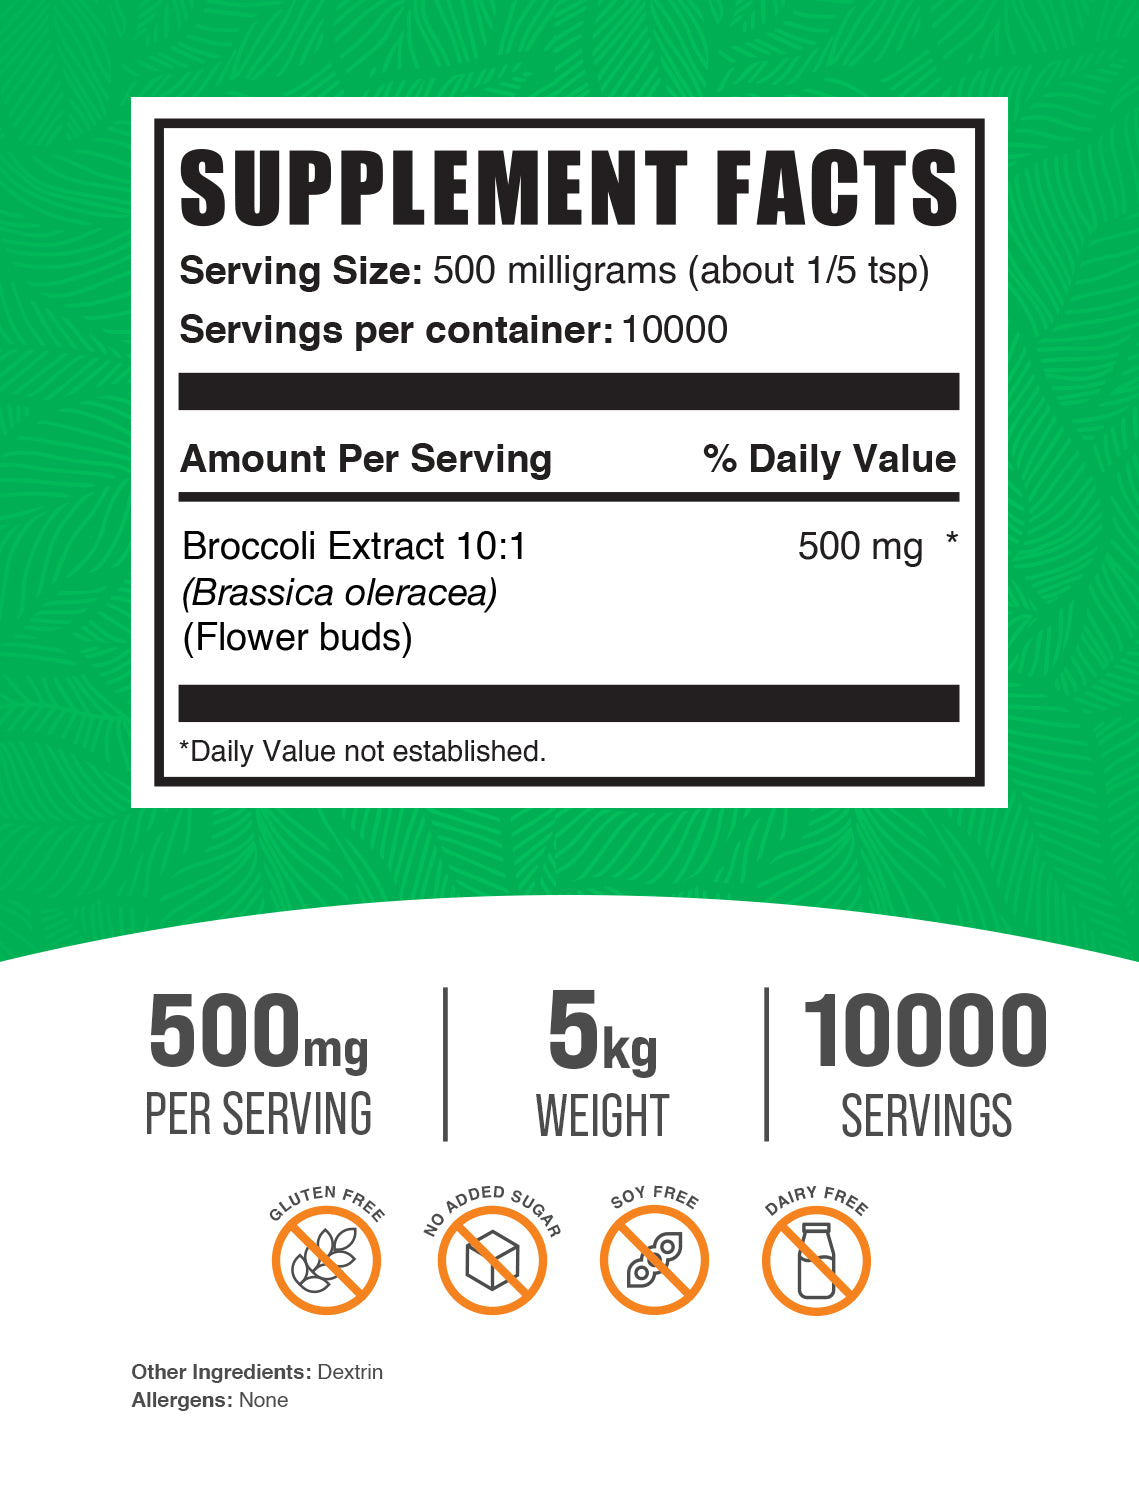 Broccoli Extract 5kg Supplement Facts